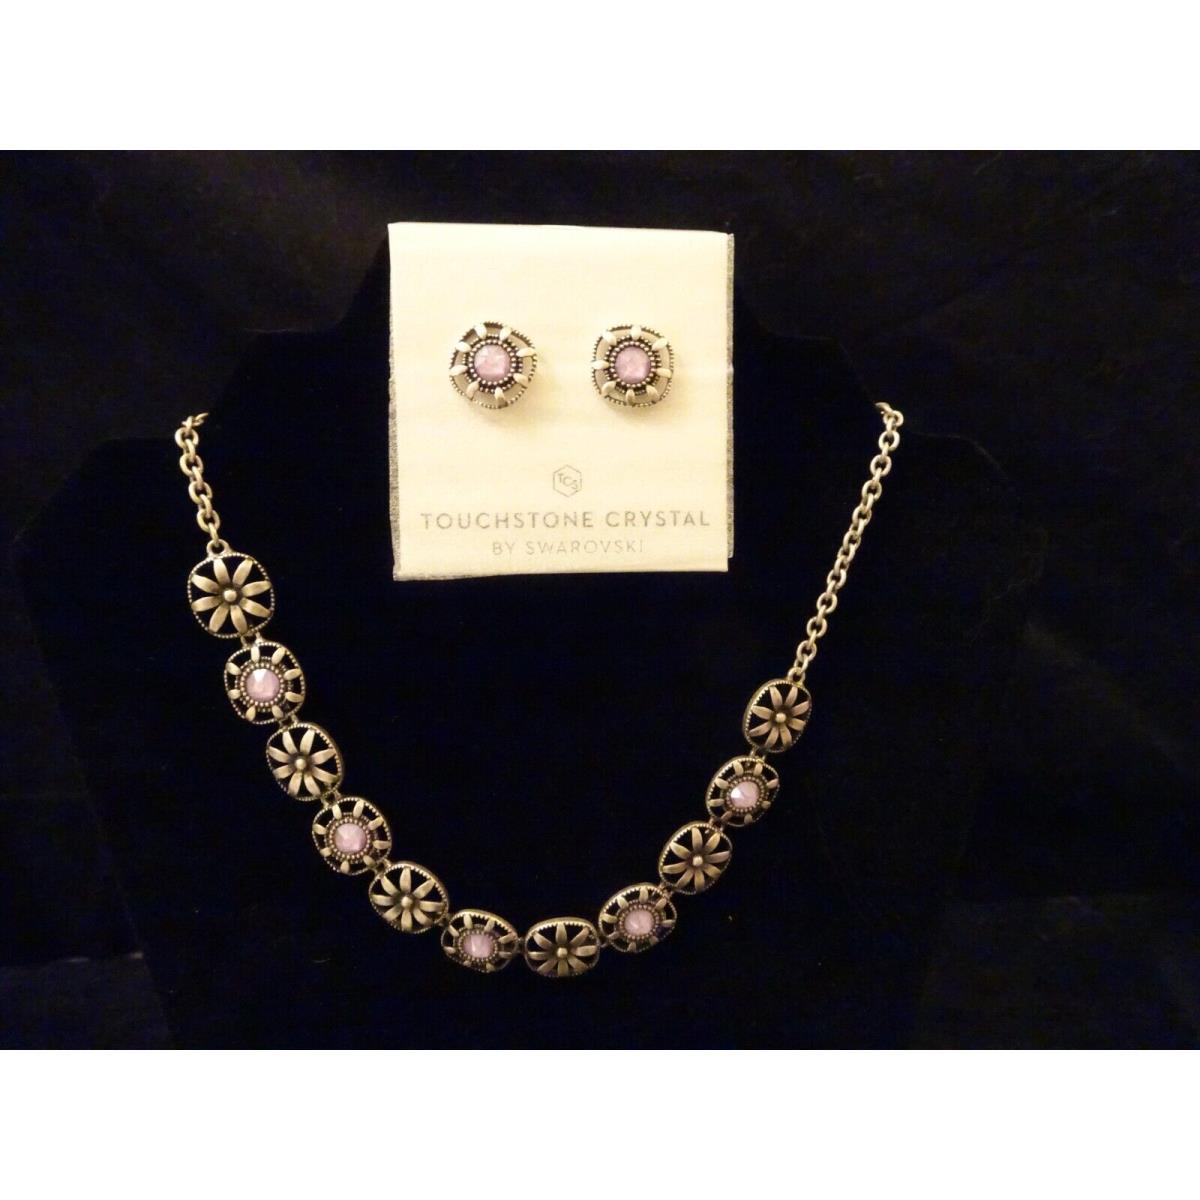 Touchstone Crystal by Swarovski Flower Power Necklace and Earring Set